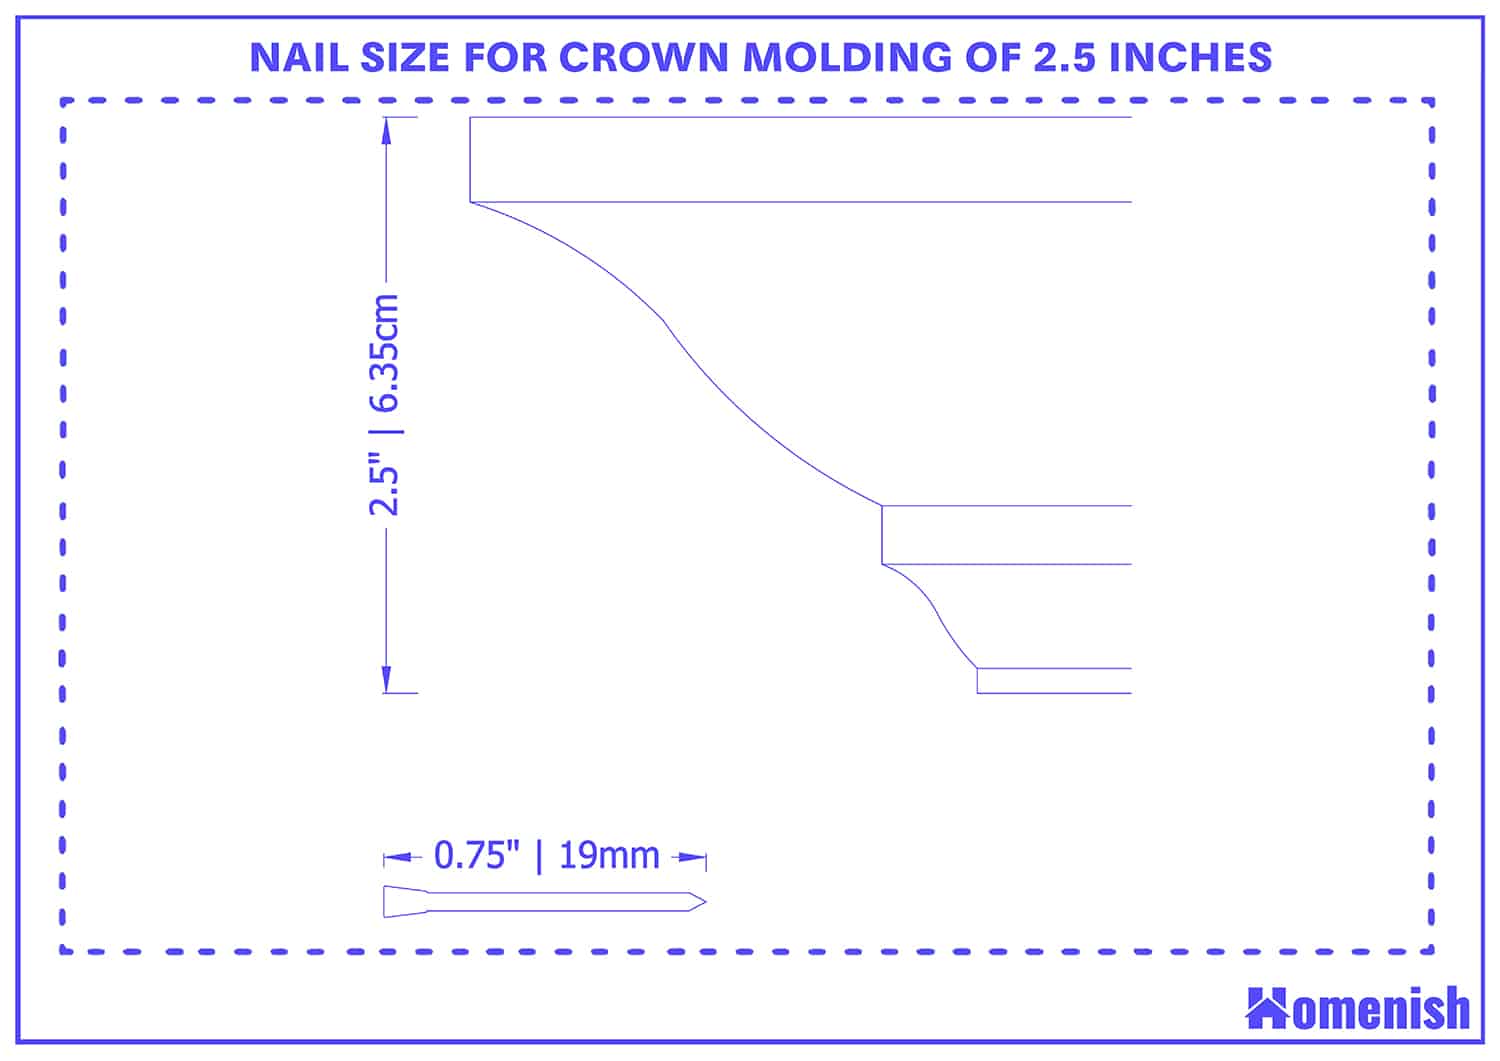 nail size for crown modling 0f 2.5 inches